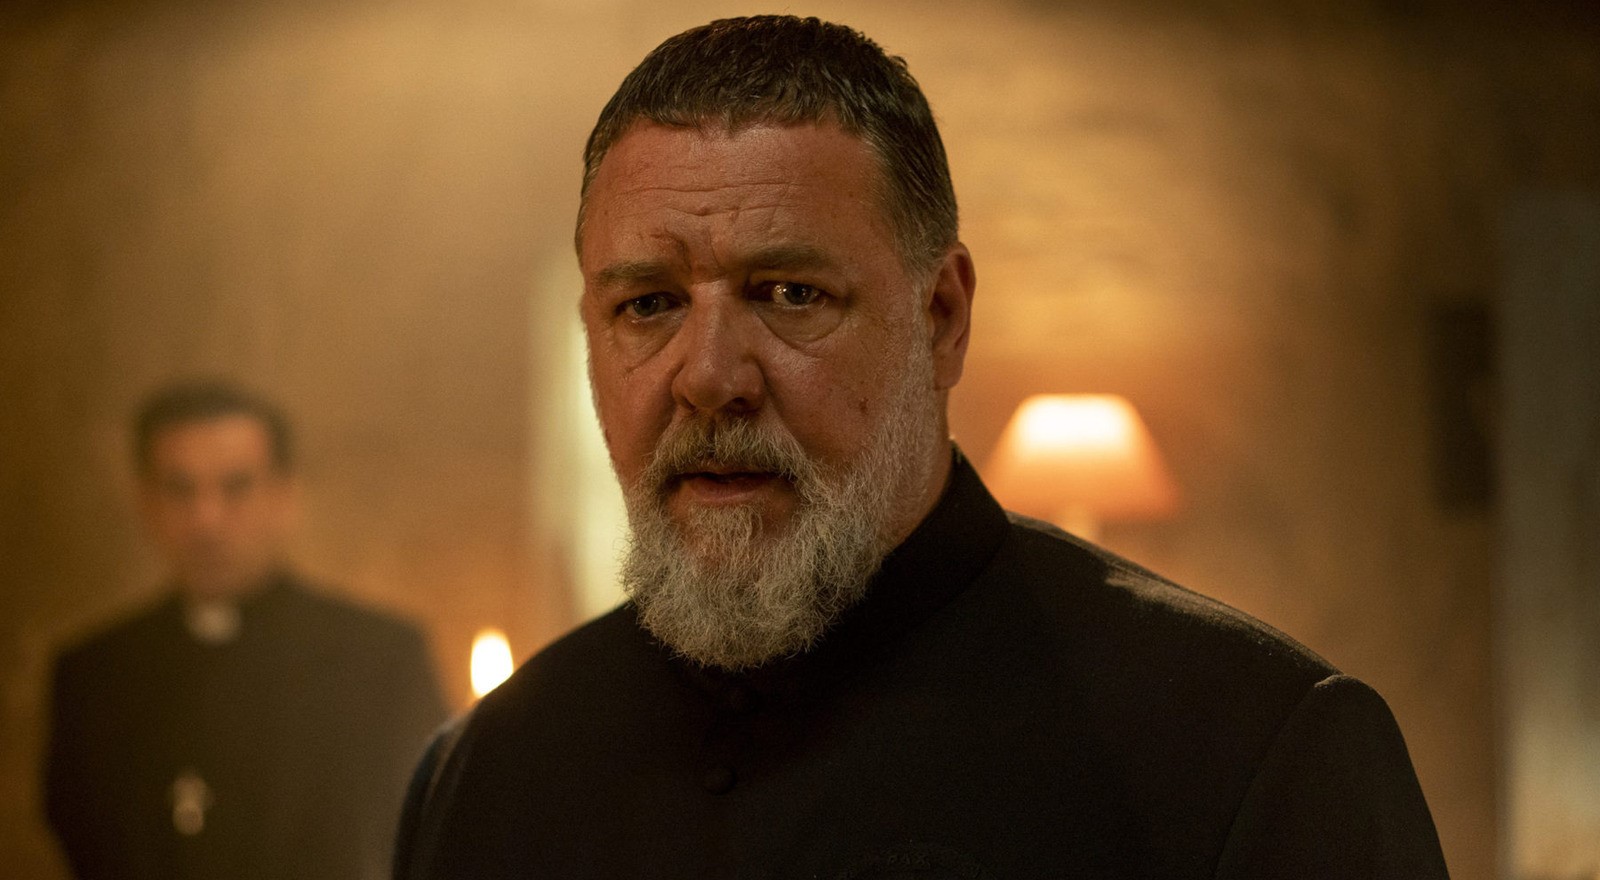 #The Pope’s Exorcist 2 mit Russell Crowe wird bereits entwickelt